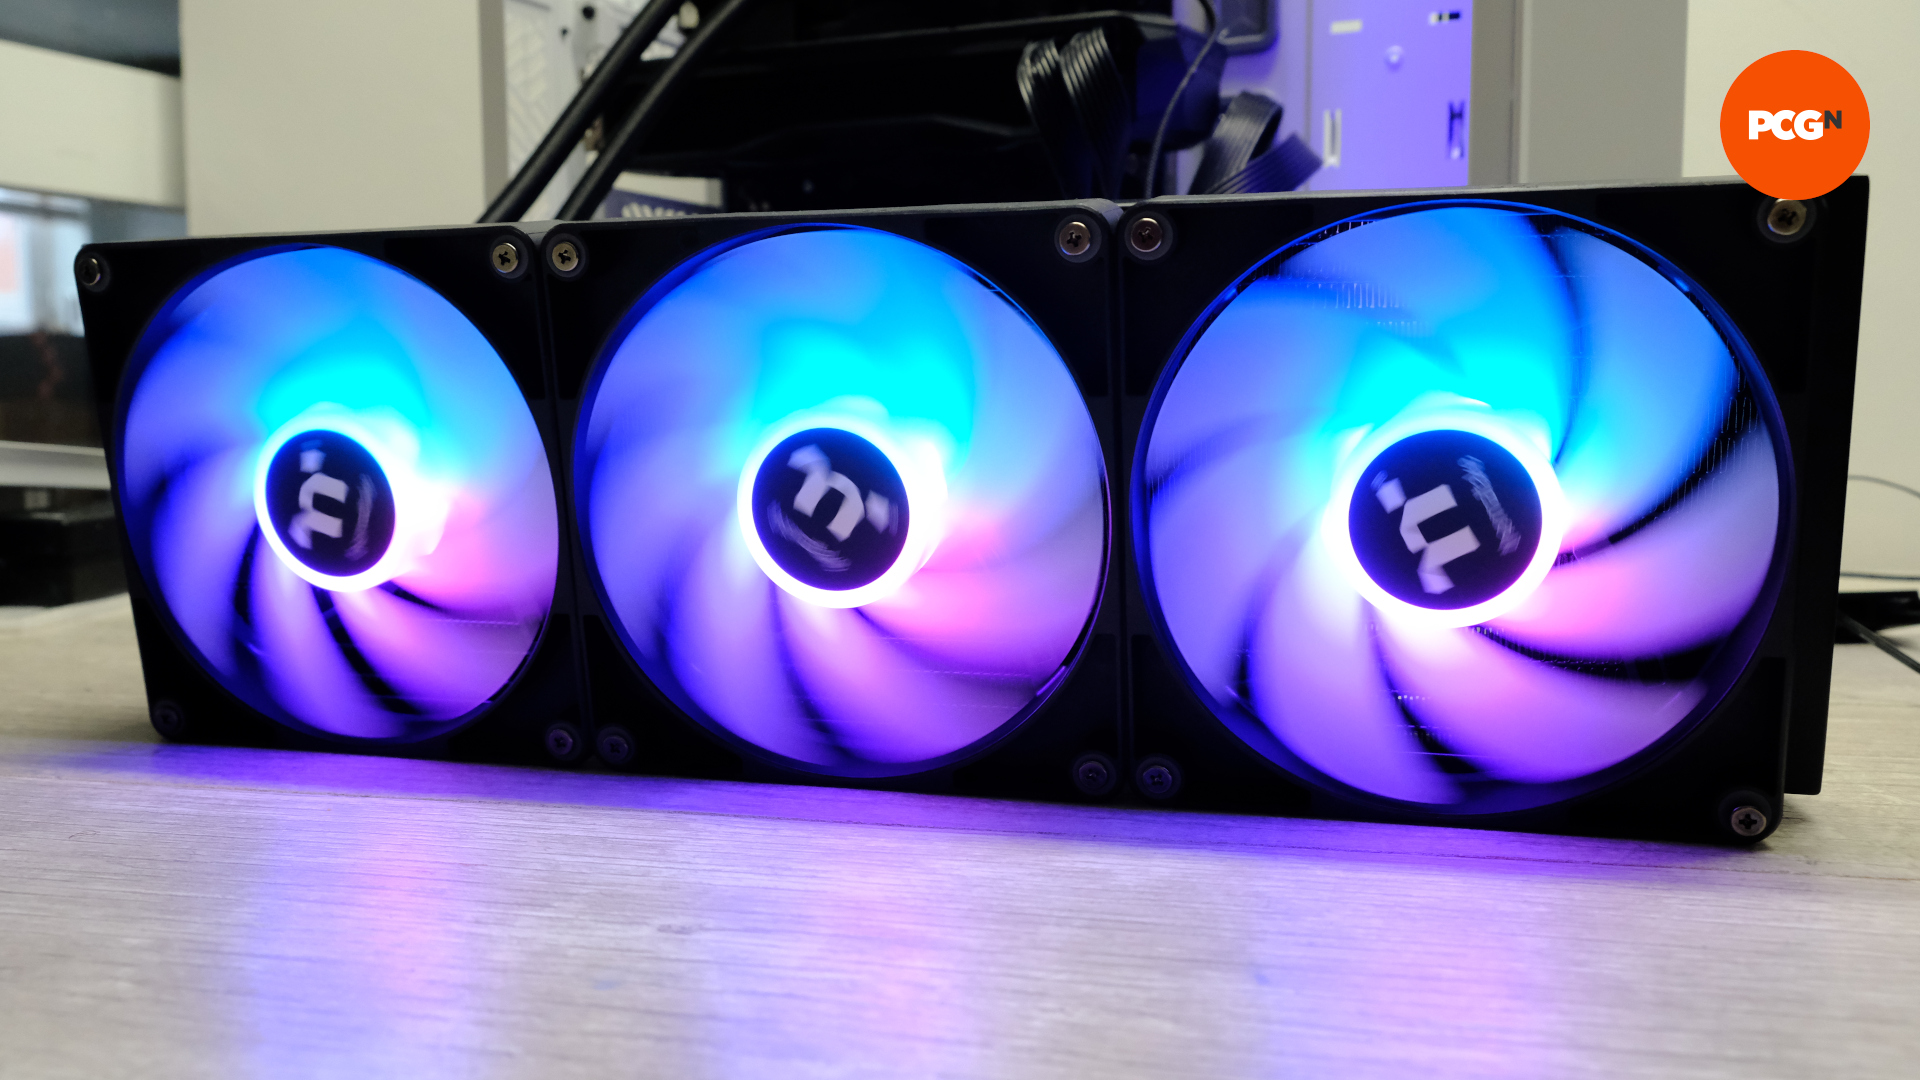 The Thermaltake TH420 V2 ARGB Sync AIO plugged in and the fans illuminated with RGB